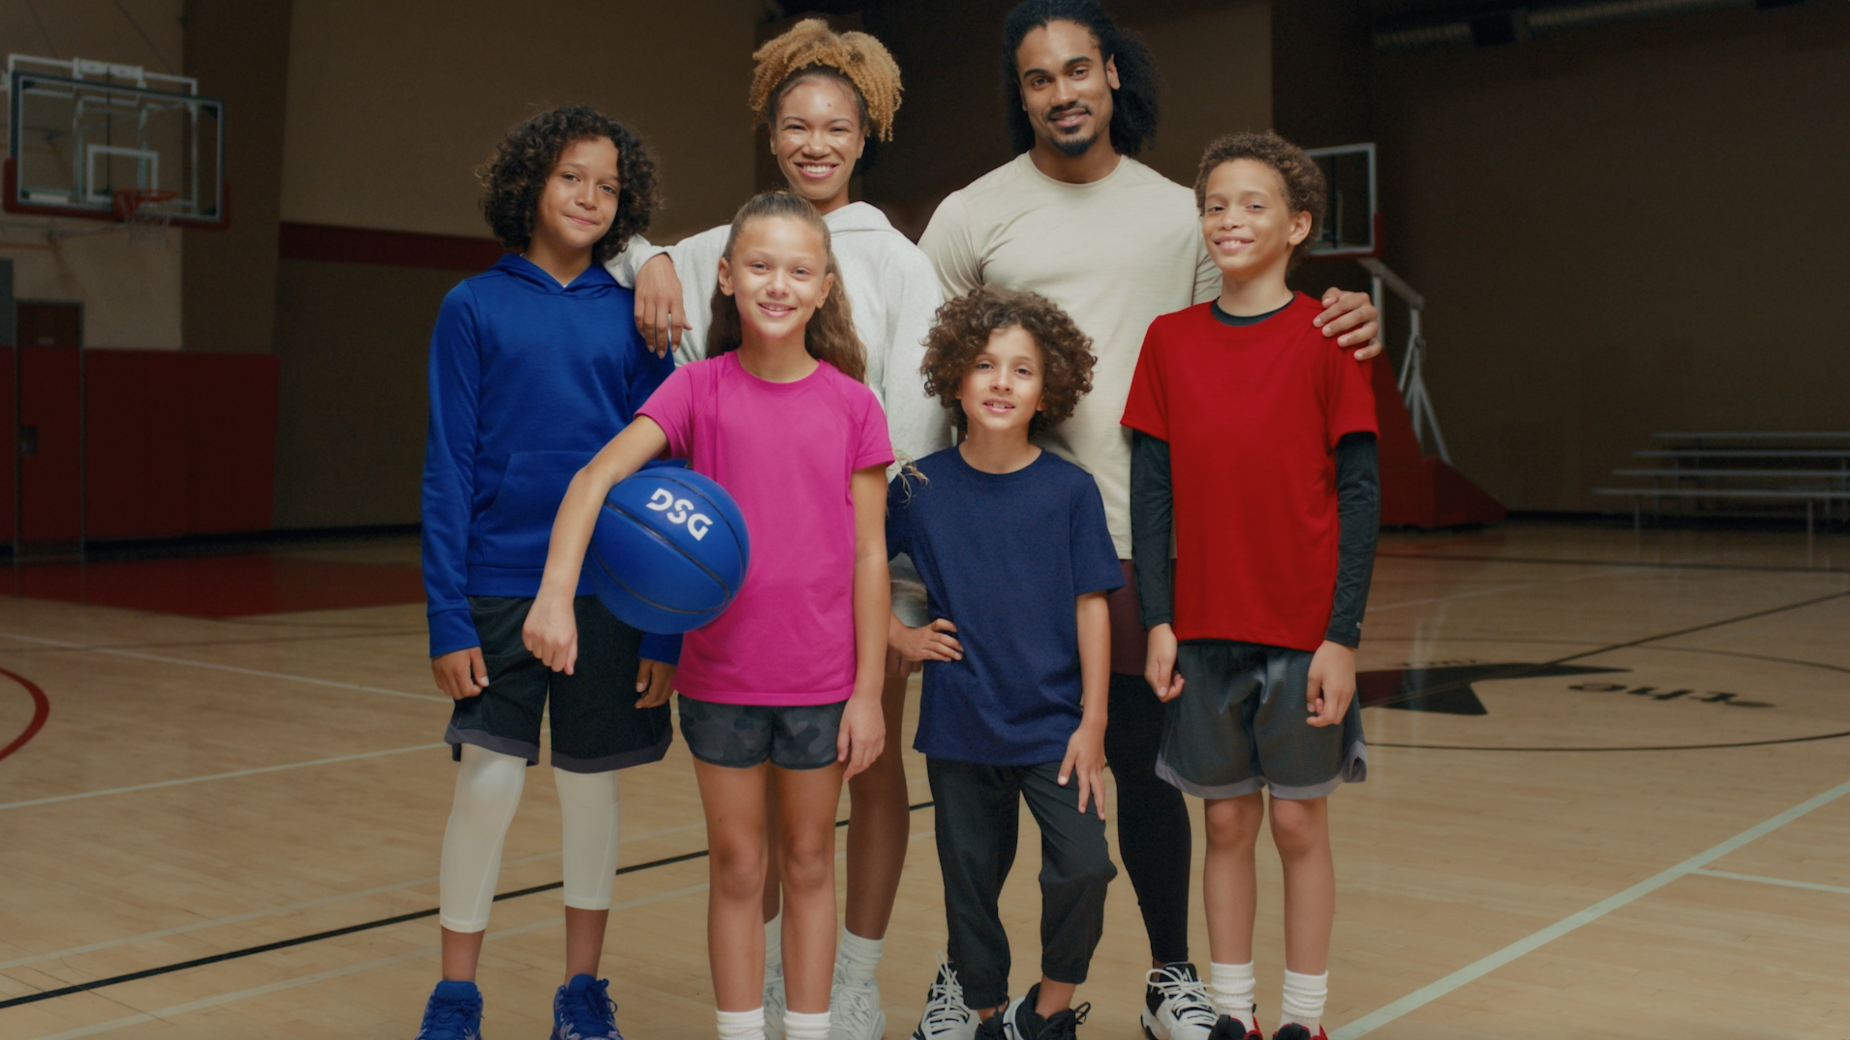 Dick's Sporting Goods Campaign Has Gear for Every Active Family